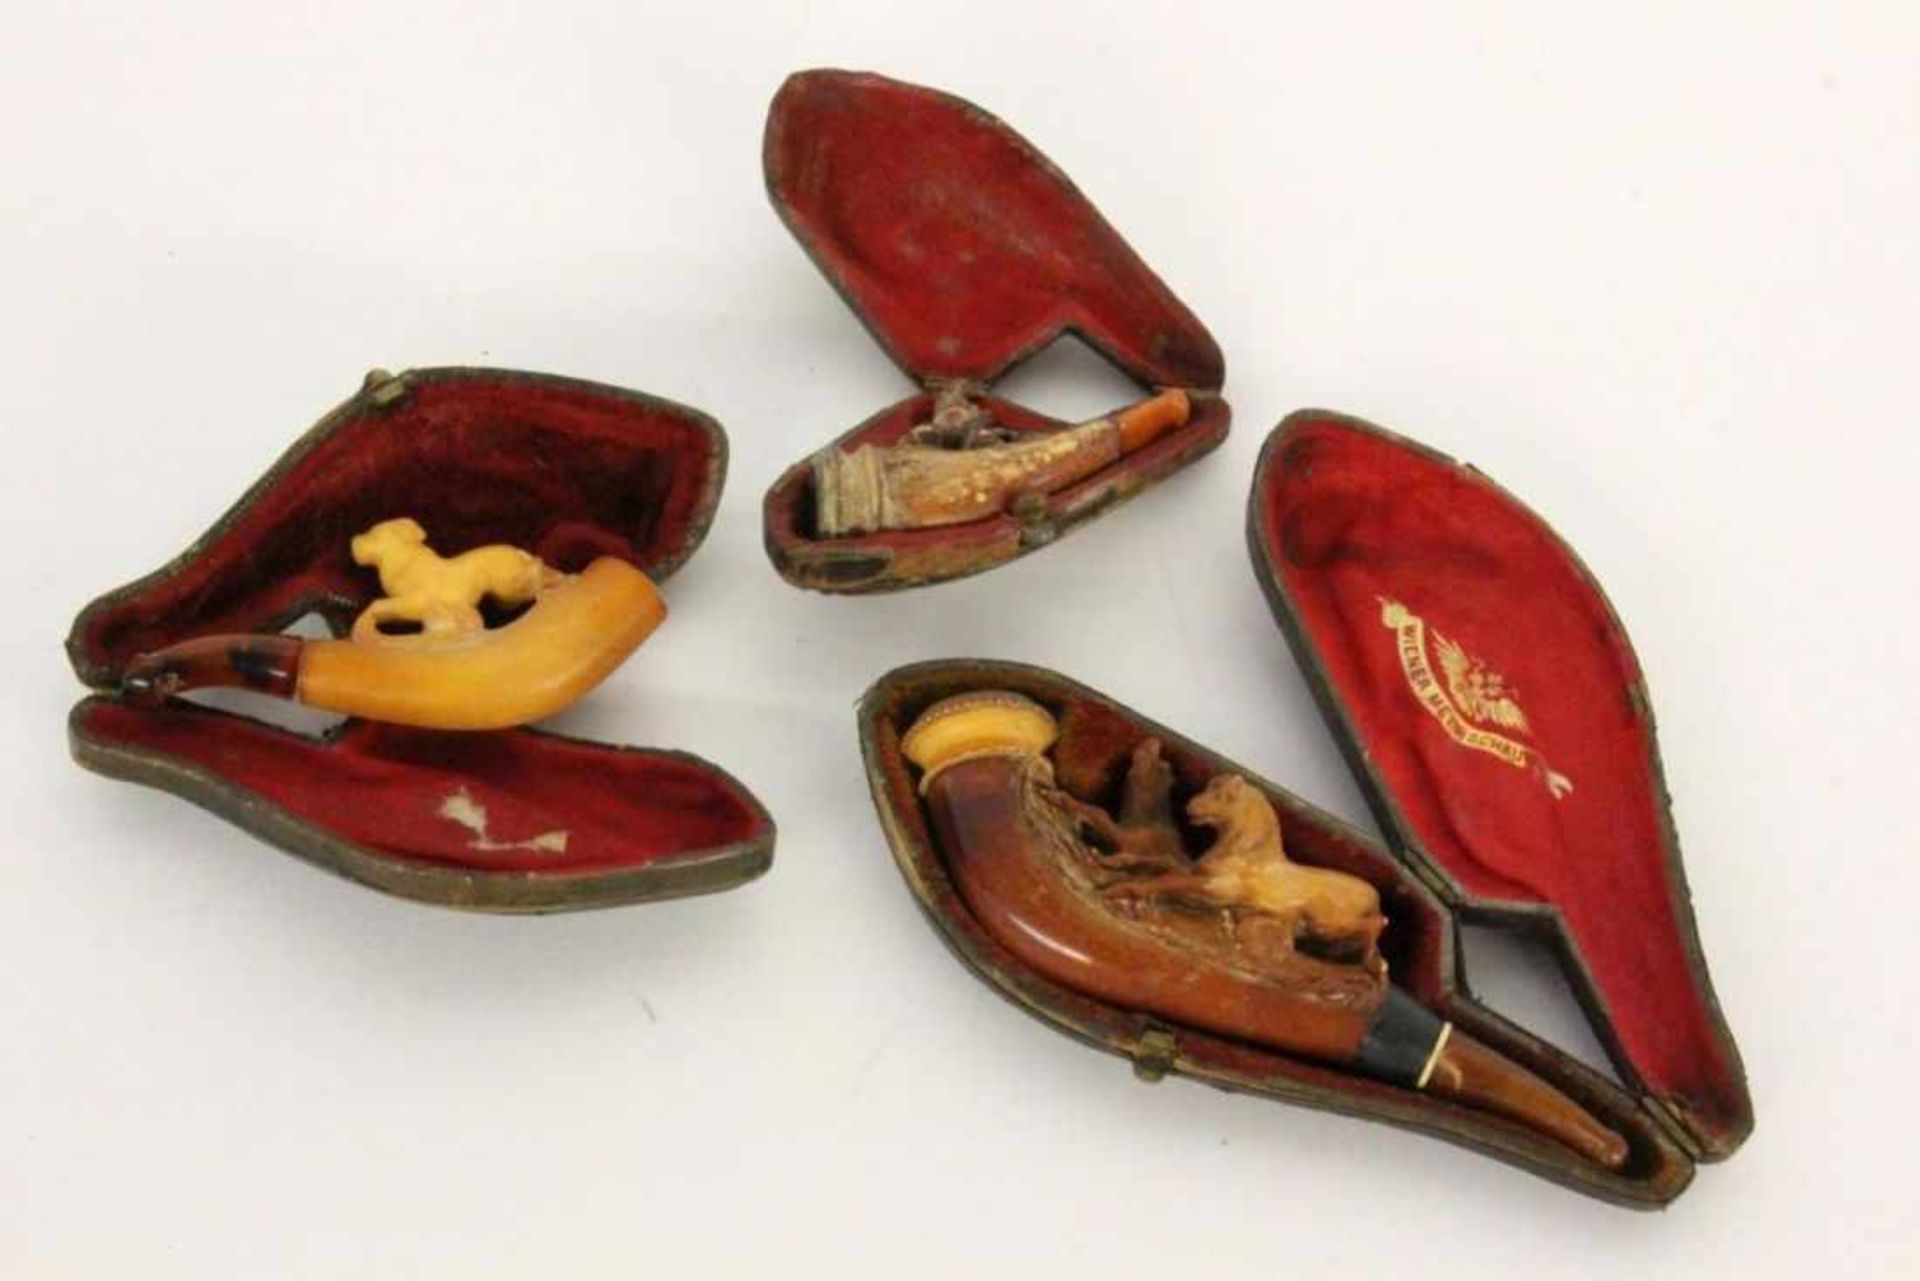 THREE OLD MEERSCHAUM PIPES with leather cases. 7-11.5 cm long. Condition: signs of wear and tear